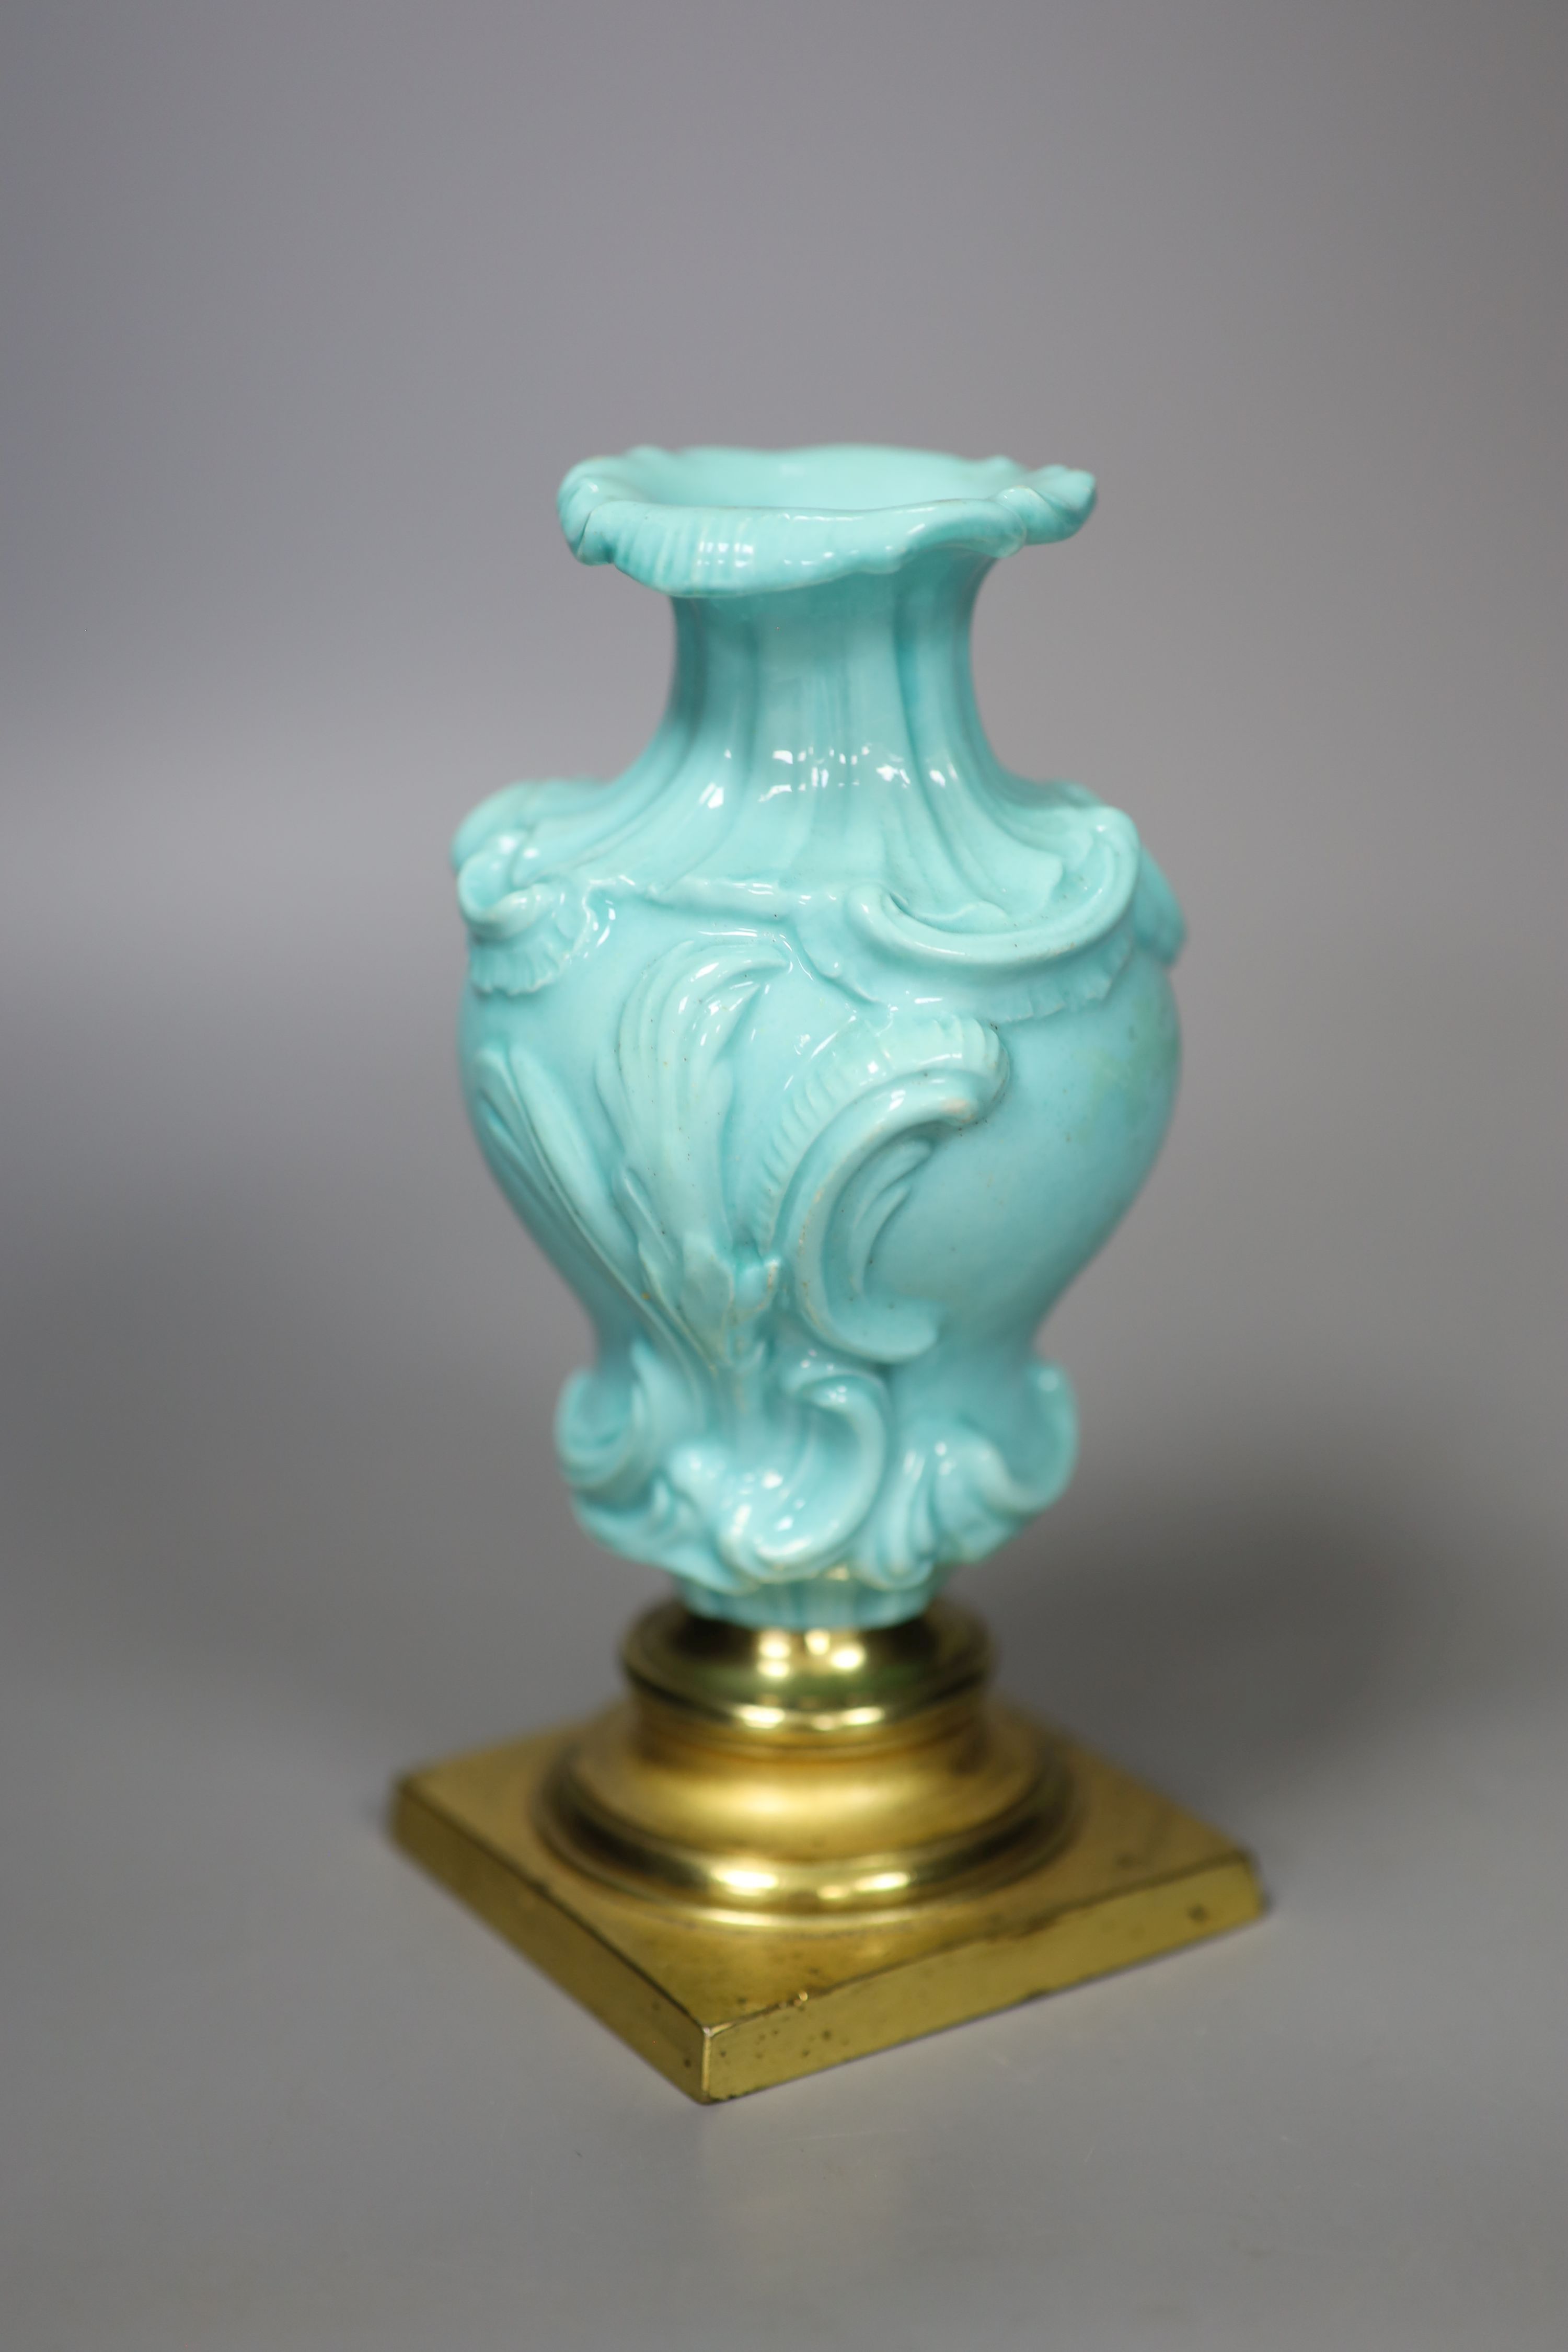 A Chelsea Derby rare rococo moulded vase with celadon type ground, mount on a gilt metal base, from the collection of Dr. Alasdair Morr